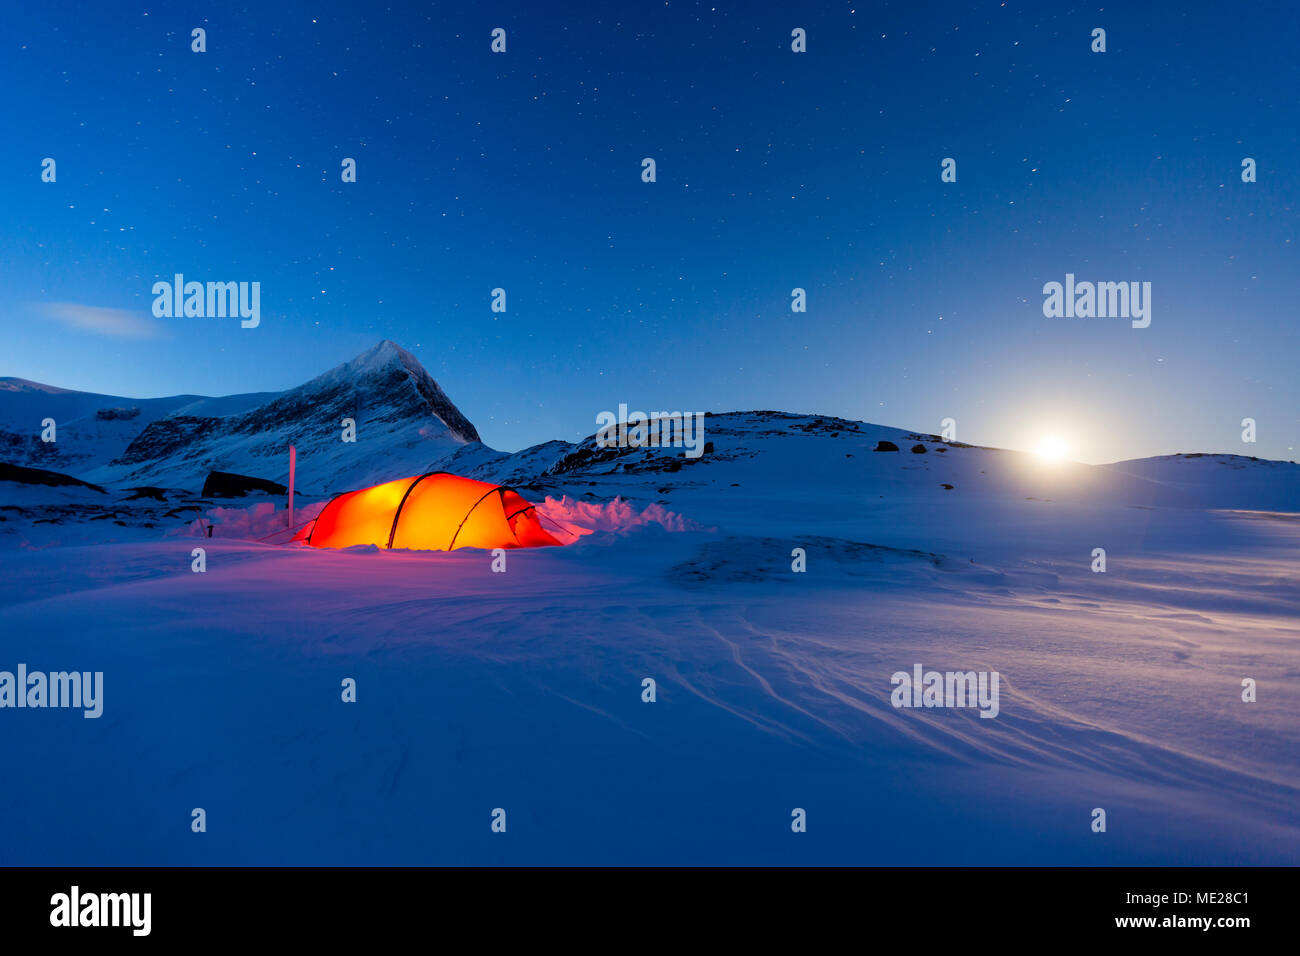 Tent by full moon in the snow, Kungsleden or king's trail, Province of Lapland, Sweden, Scandinavia Stock Photo